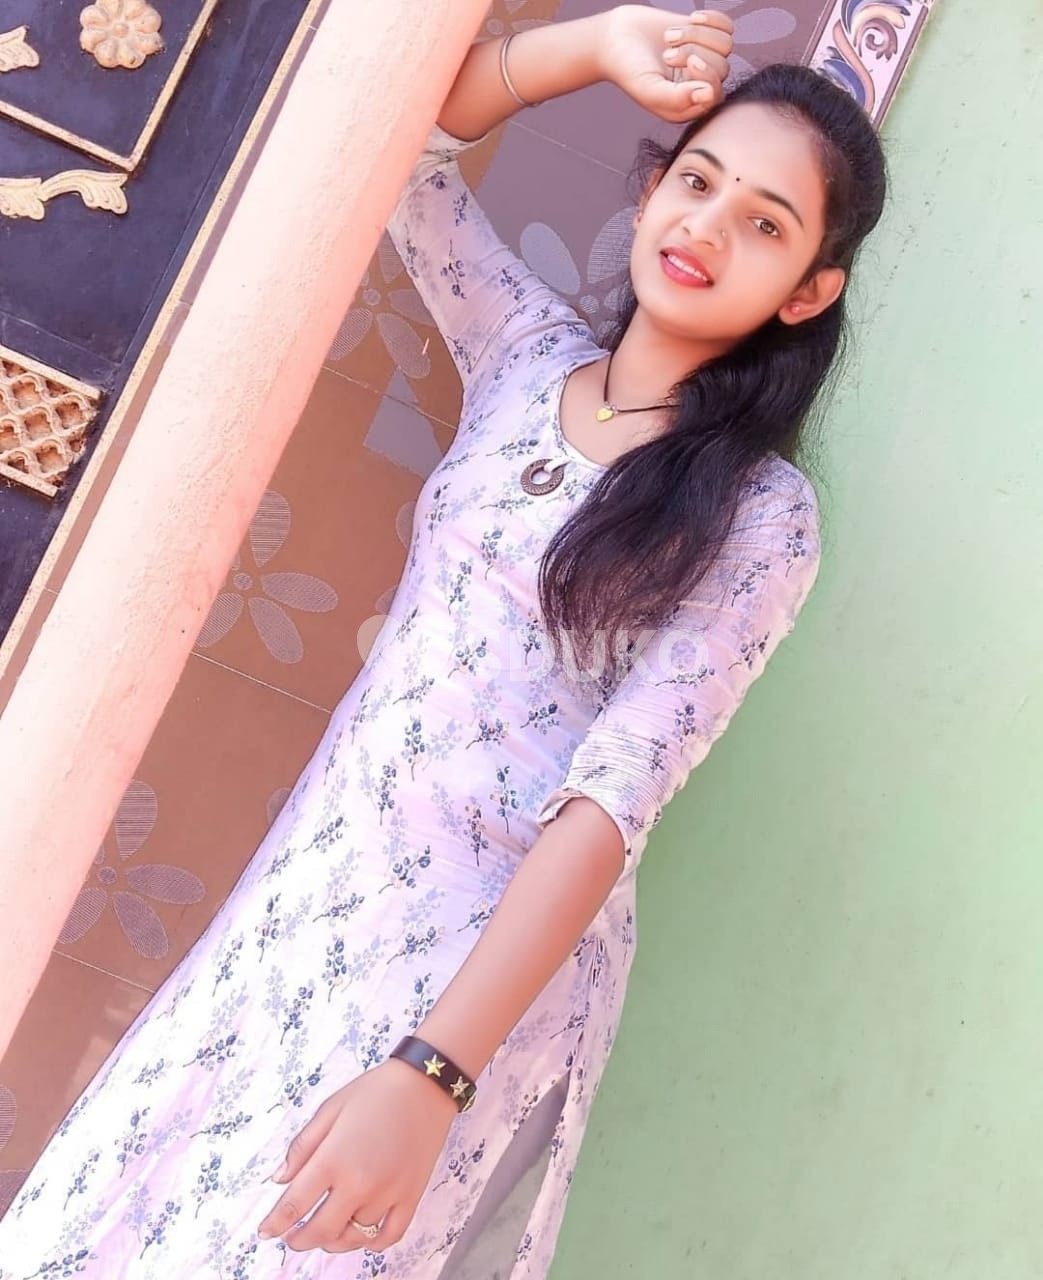 ....( 24×7 BHIWANDI ALL AREA)❣️BEST VIP HOT COLLEGE GIRL GENUINE SERVICE PROVIDE UNLIMITED SHOTS ALL TYPE SEX ALLOW